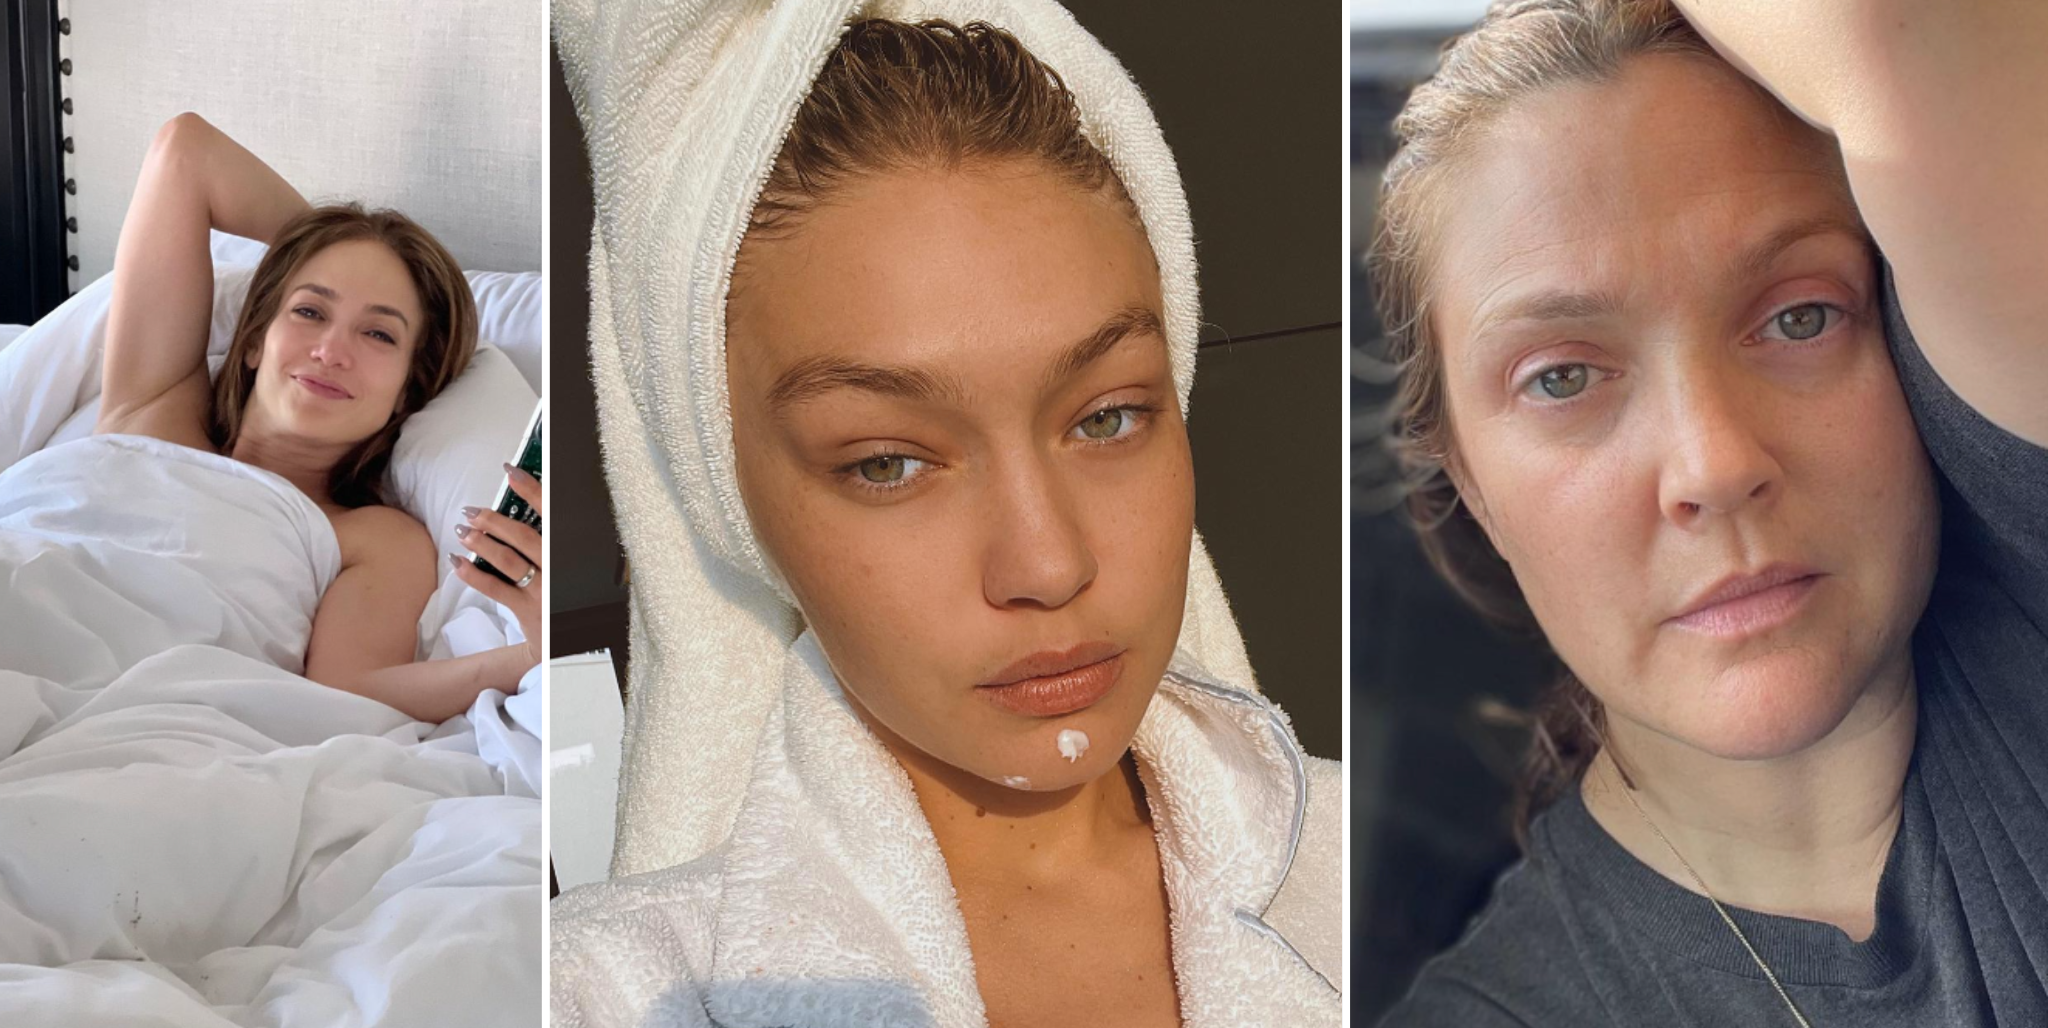 models without makeup or photoshop